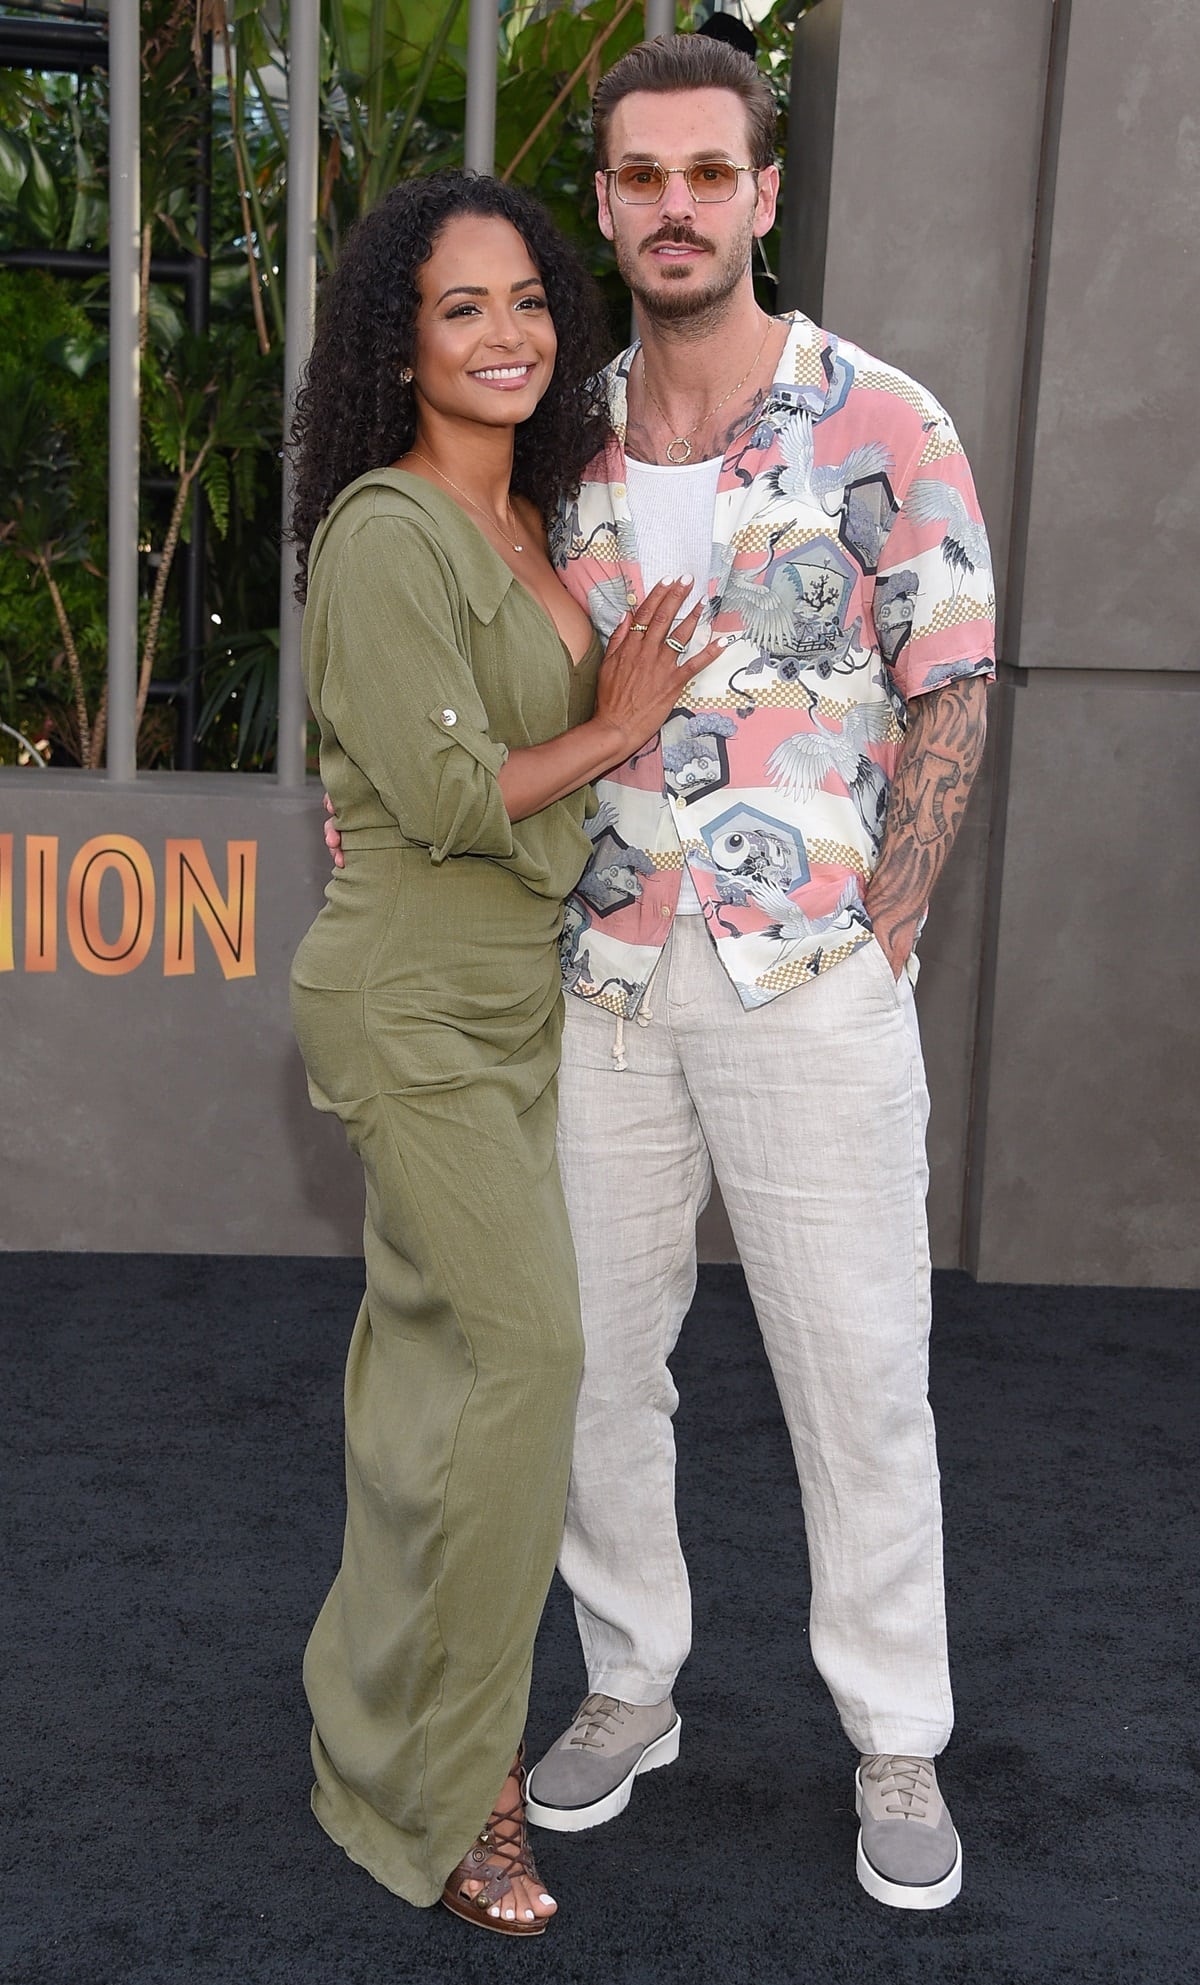 Christina Milian and Matt Pokora began dating in August 2017 after meeting at a restaurant in France